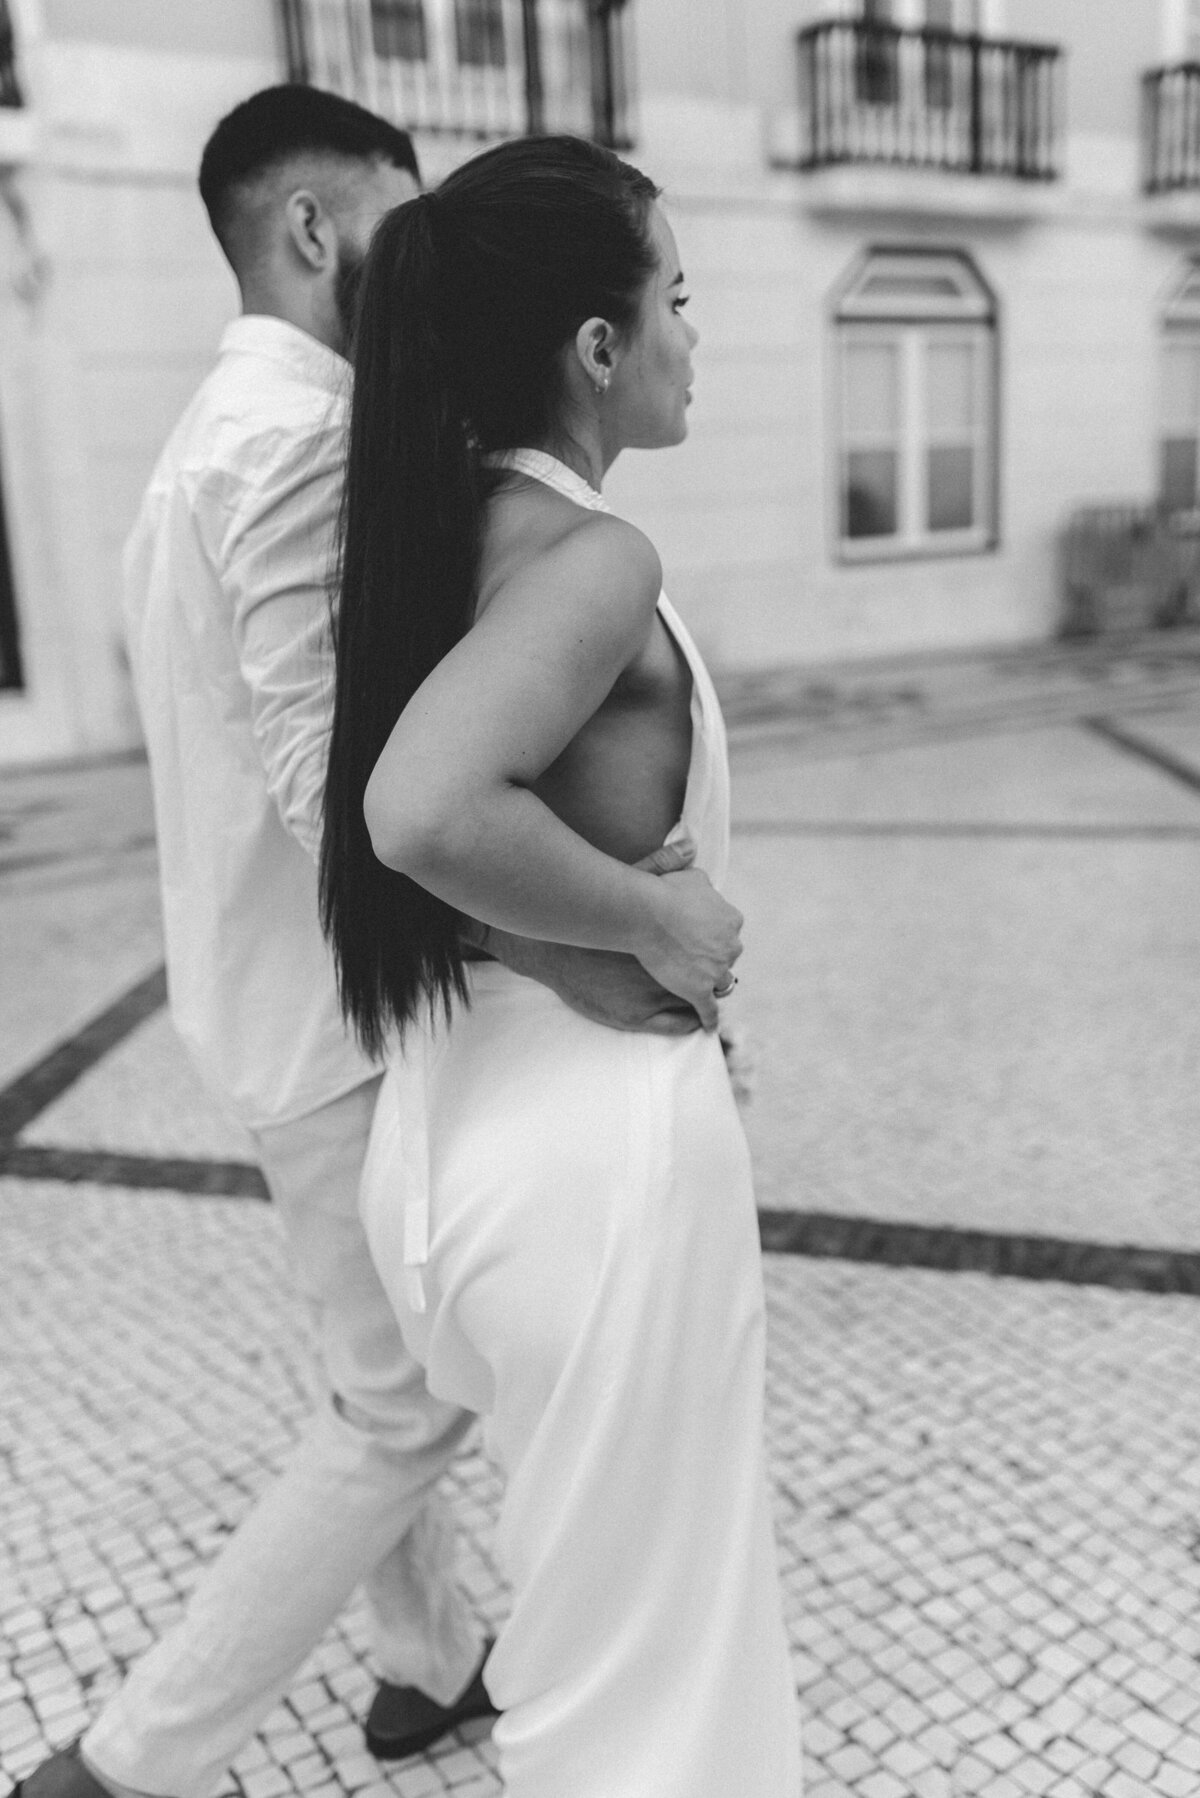 Tammie and Salvador walking in the streets of Lisbon captured by Sarah Hurja Europe destination wedding photographer.